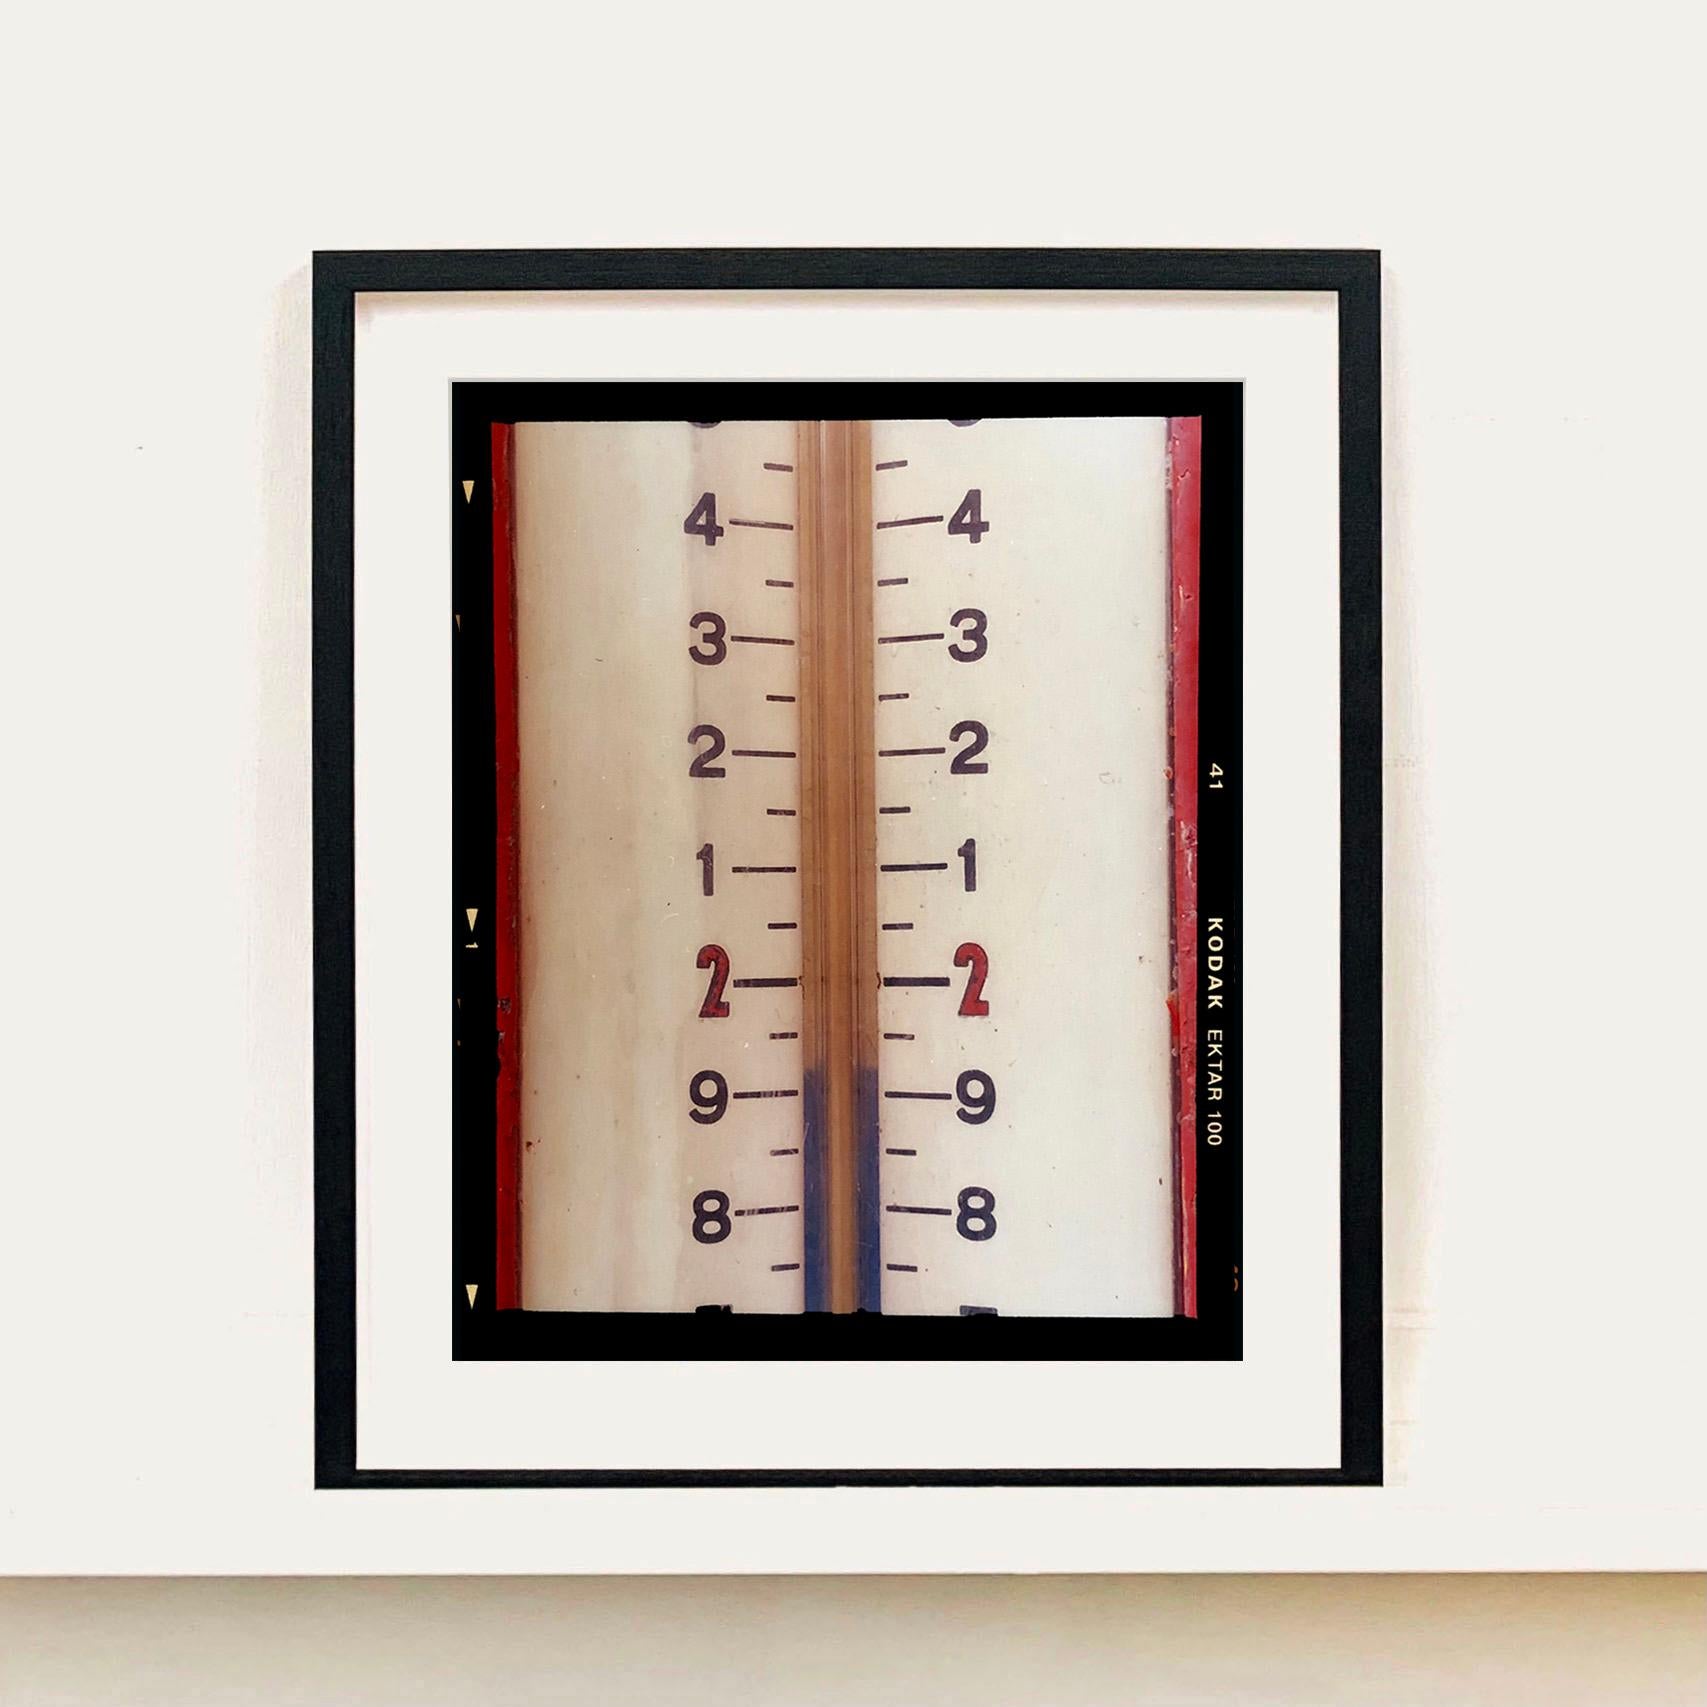 Tyre Pressure Gauge, from Richard Heeps' series A Short History of Milan.
'A Short History of Milan' began in November 2018 for a special project featuring at the Affordable Art Fair Milan 2019 and the series is ongoing. There is a reoccurring